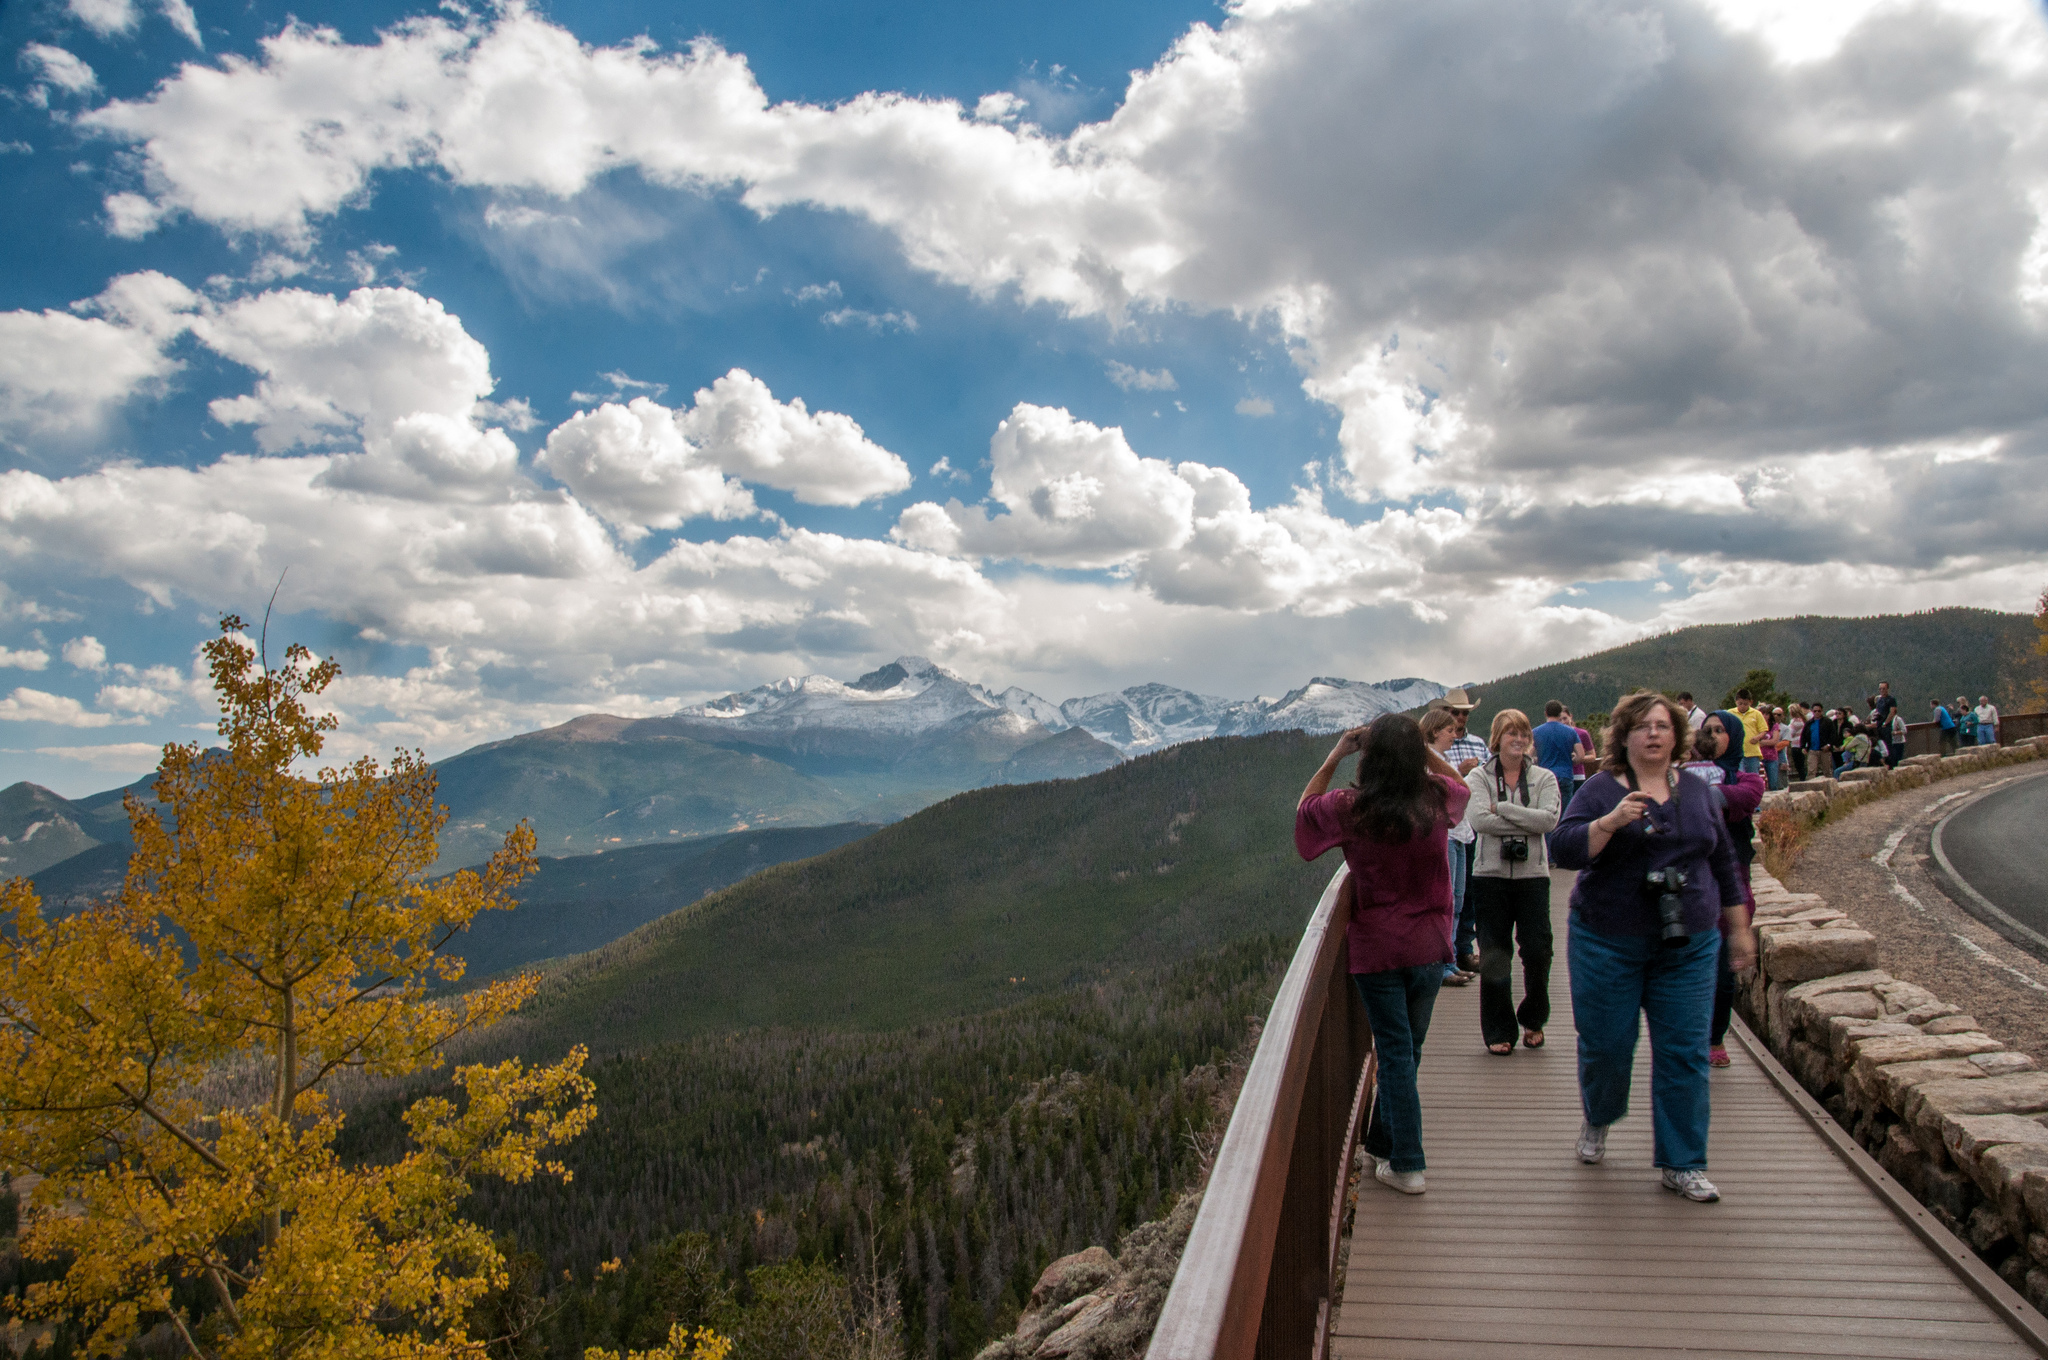 Photo: Crowds in Rocky Mountain National Park